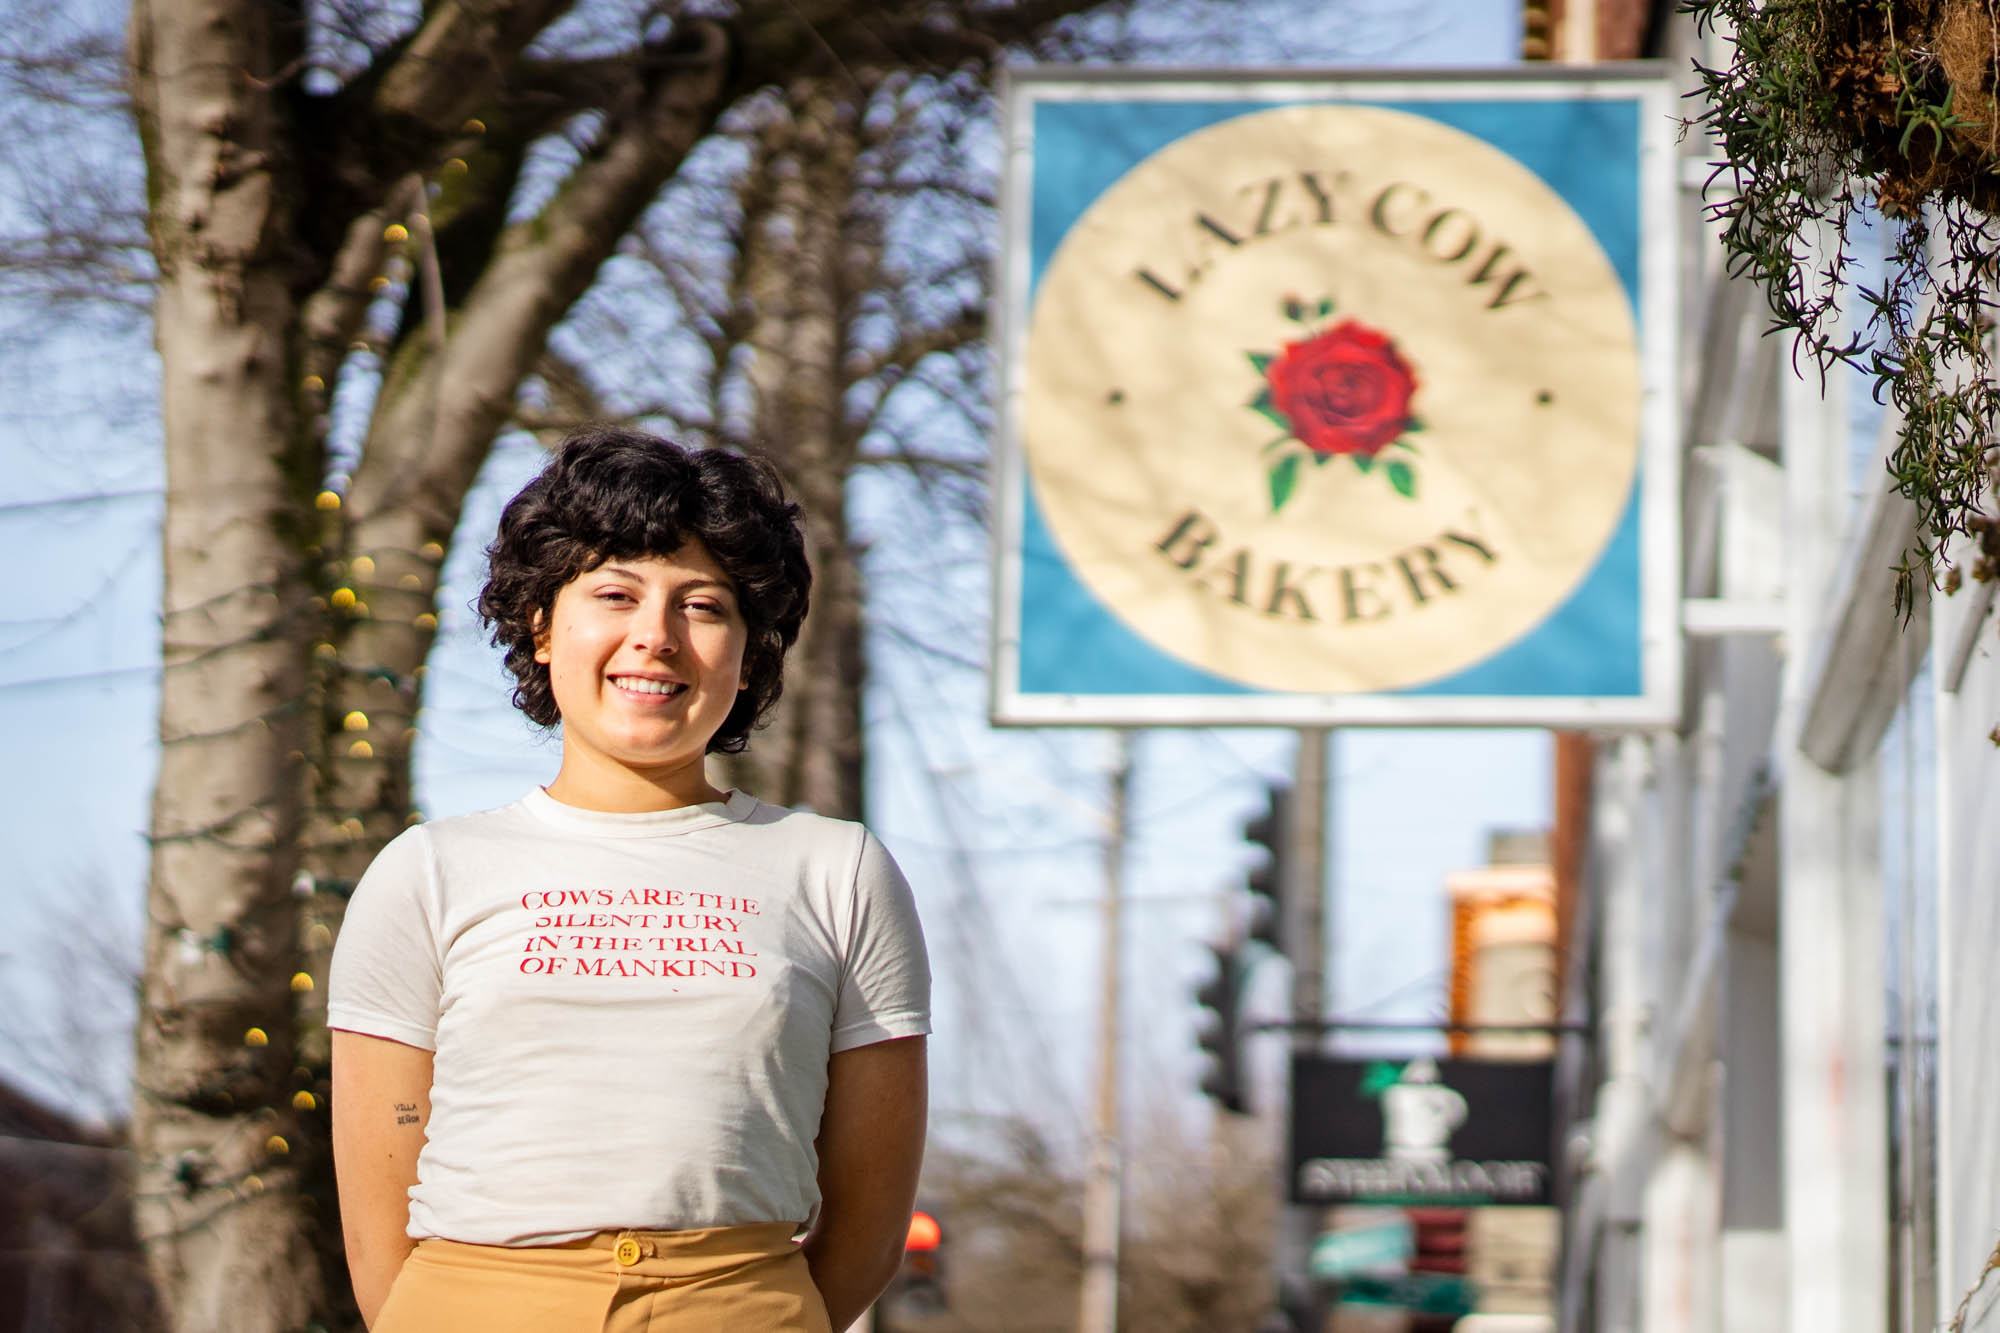 A woman stands below the sign of her bakery, Lazy Cow Bakery, on a sunny day, wearing a shirt that says “Cows are the silent jury in the trial of mankind.”